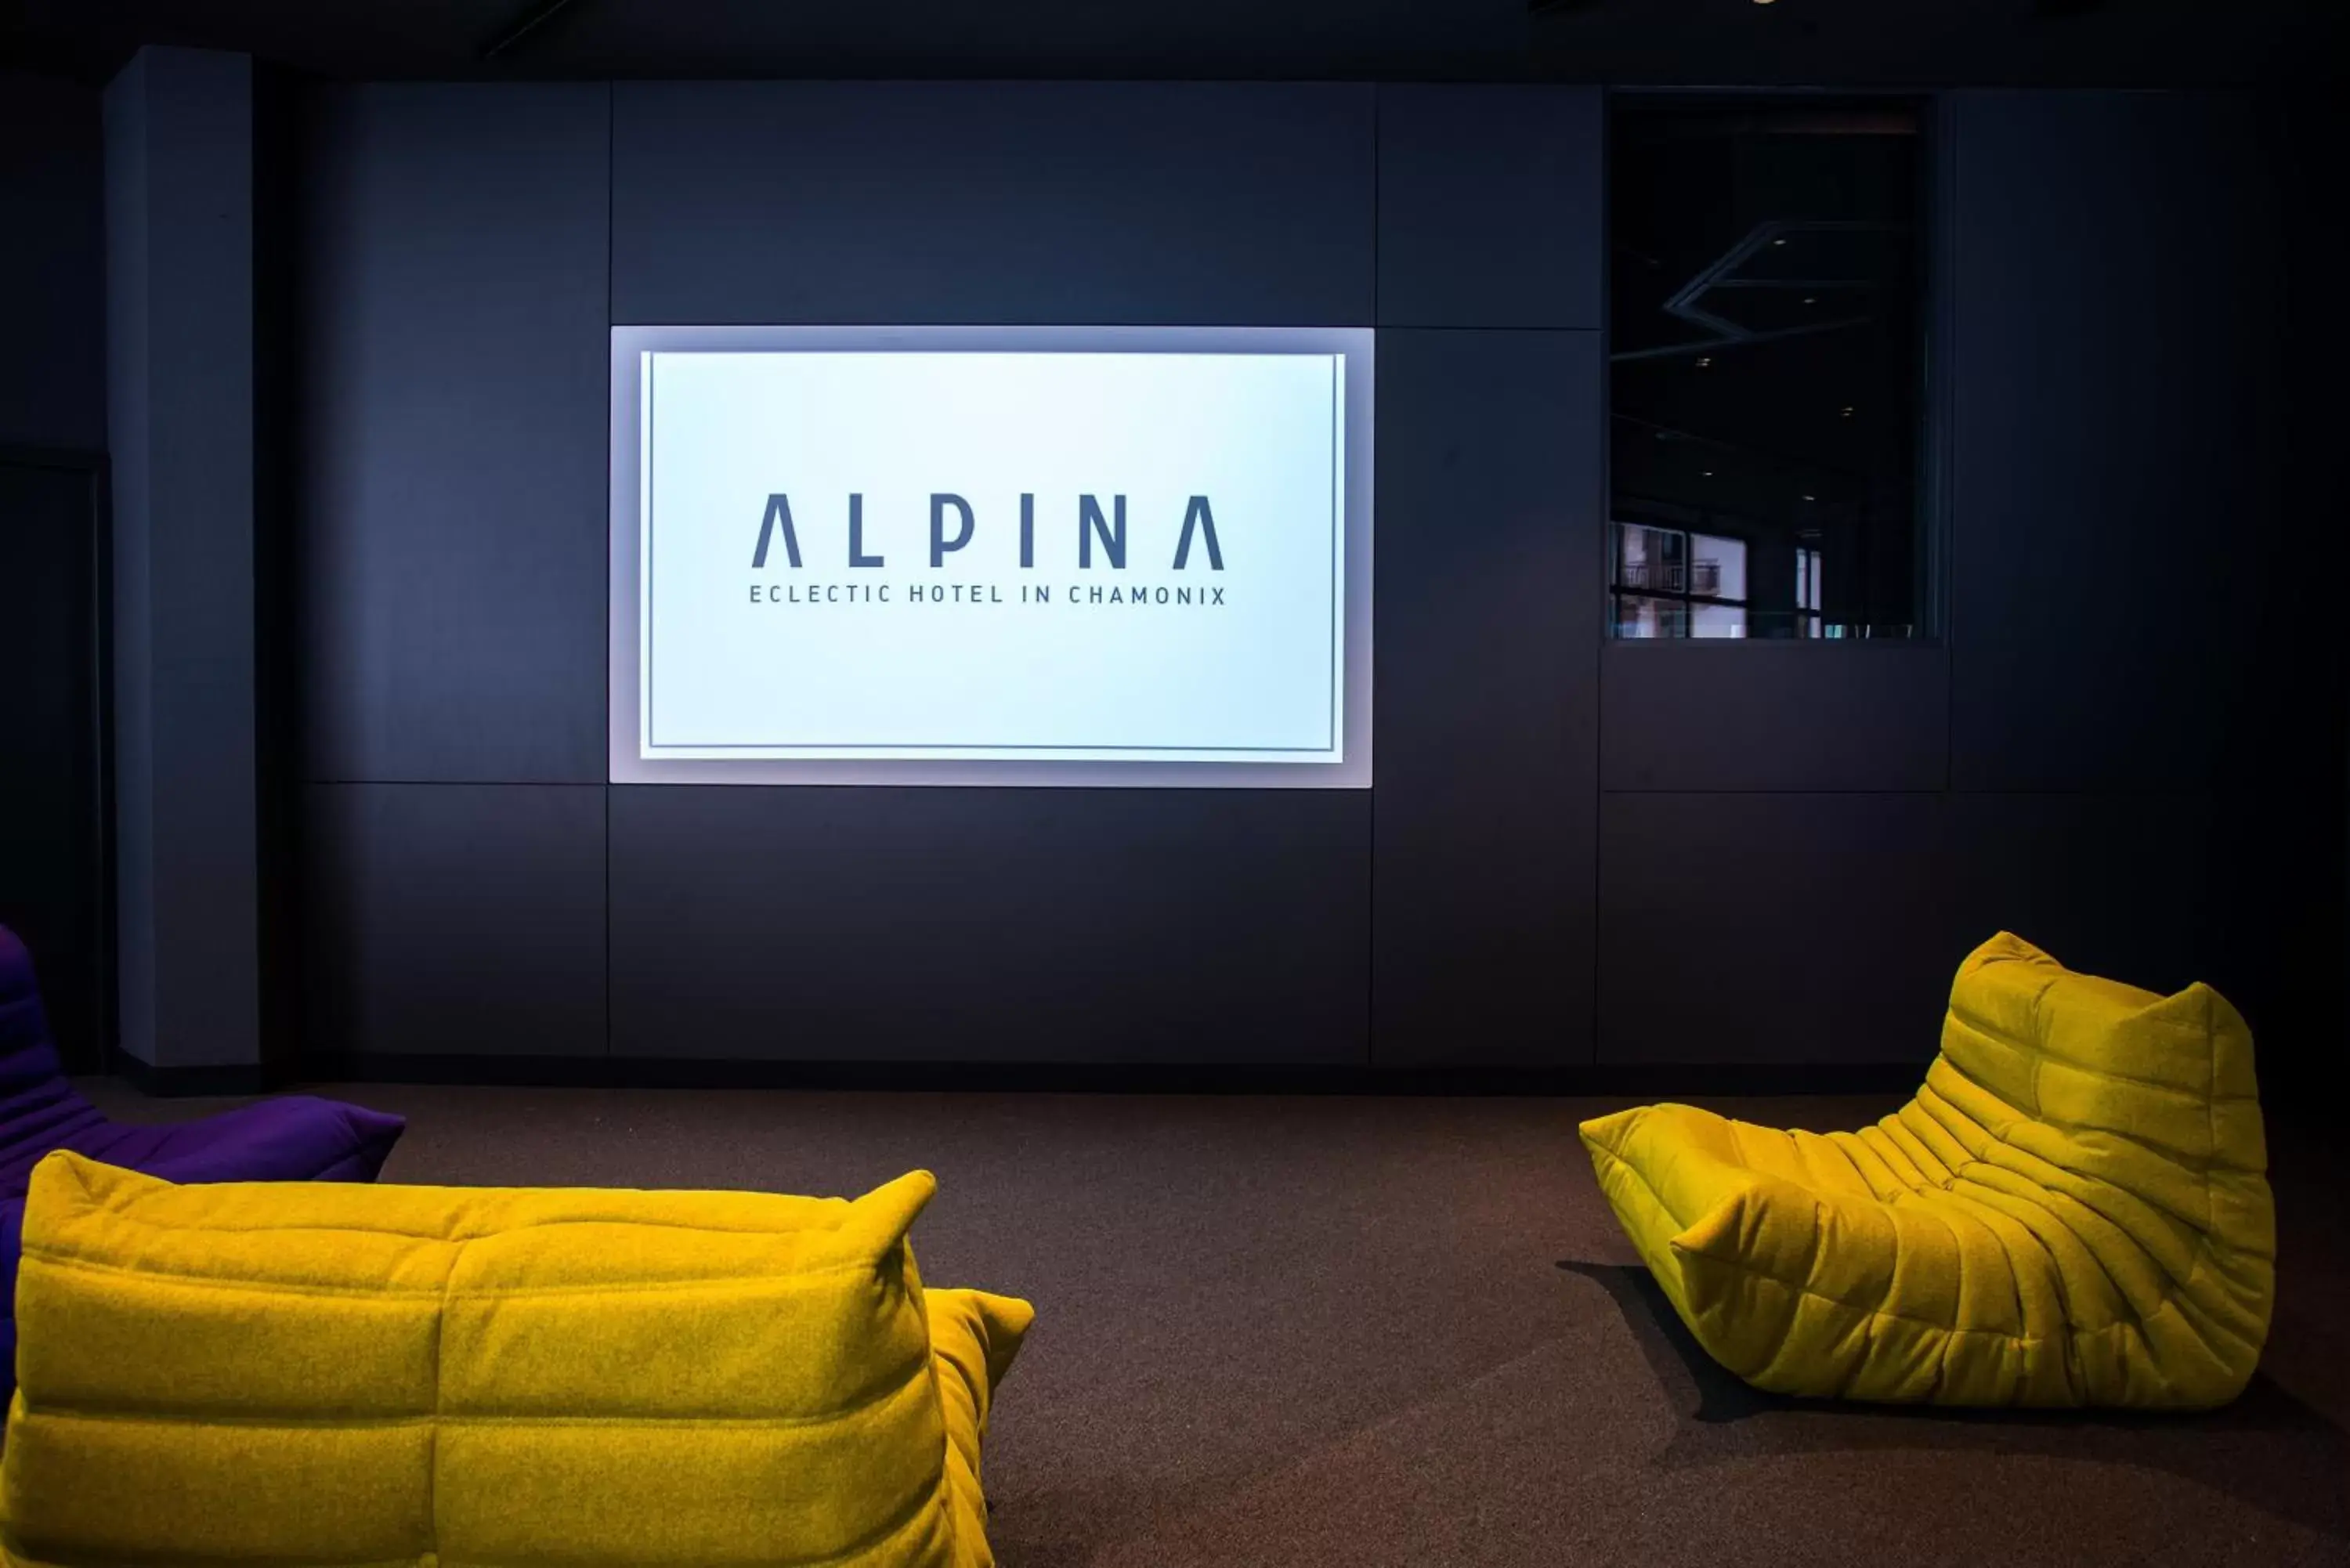 Meeting/conference room in Alpina Eclectic Hotel